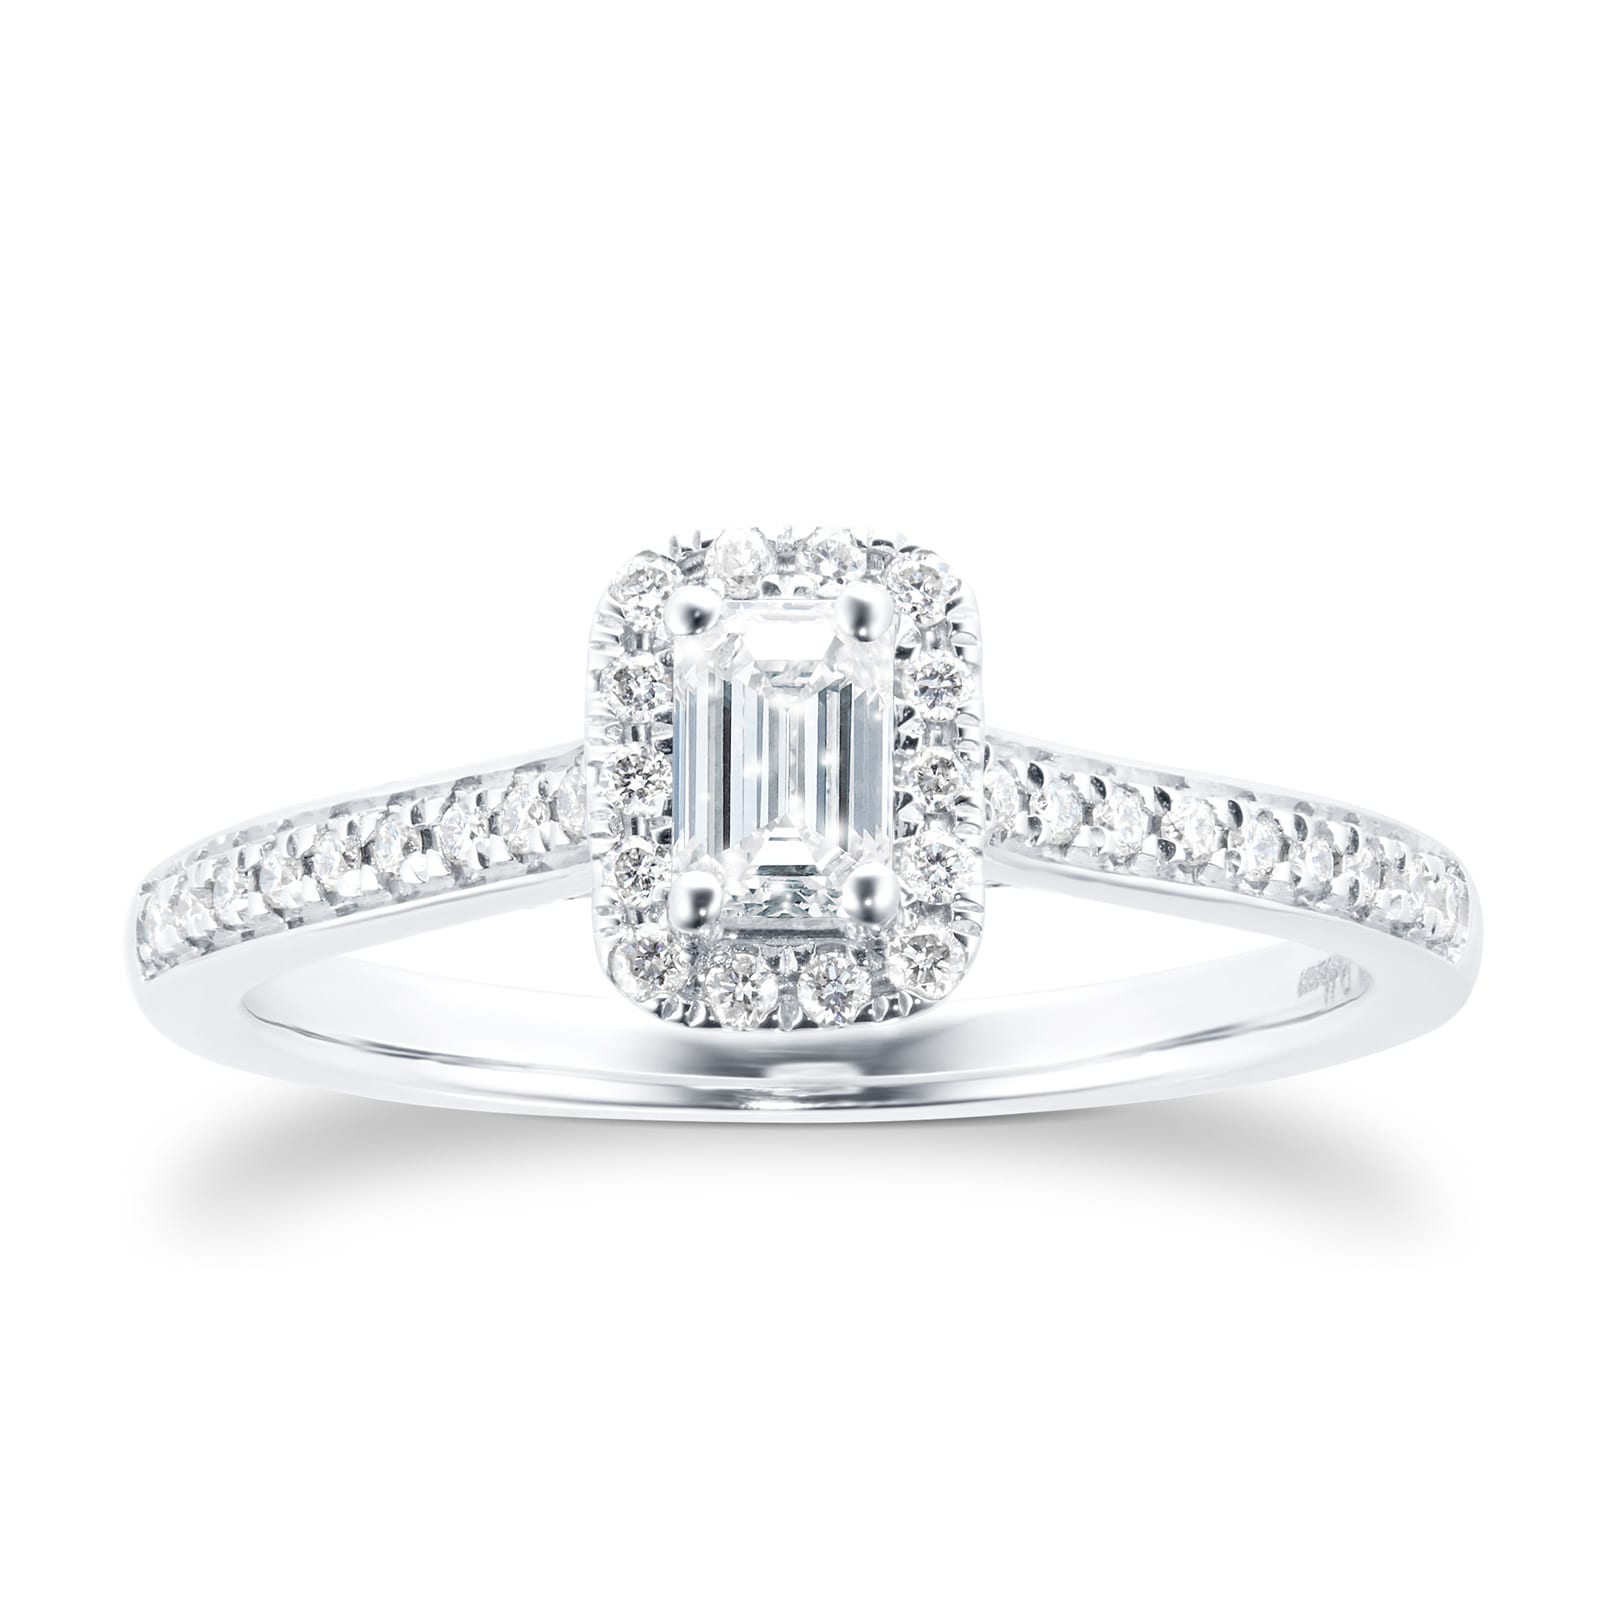 Emerald Cut 0.50ct Halo Diamond Ring In 18ct White Gold - Ring Size L